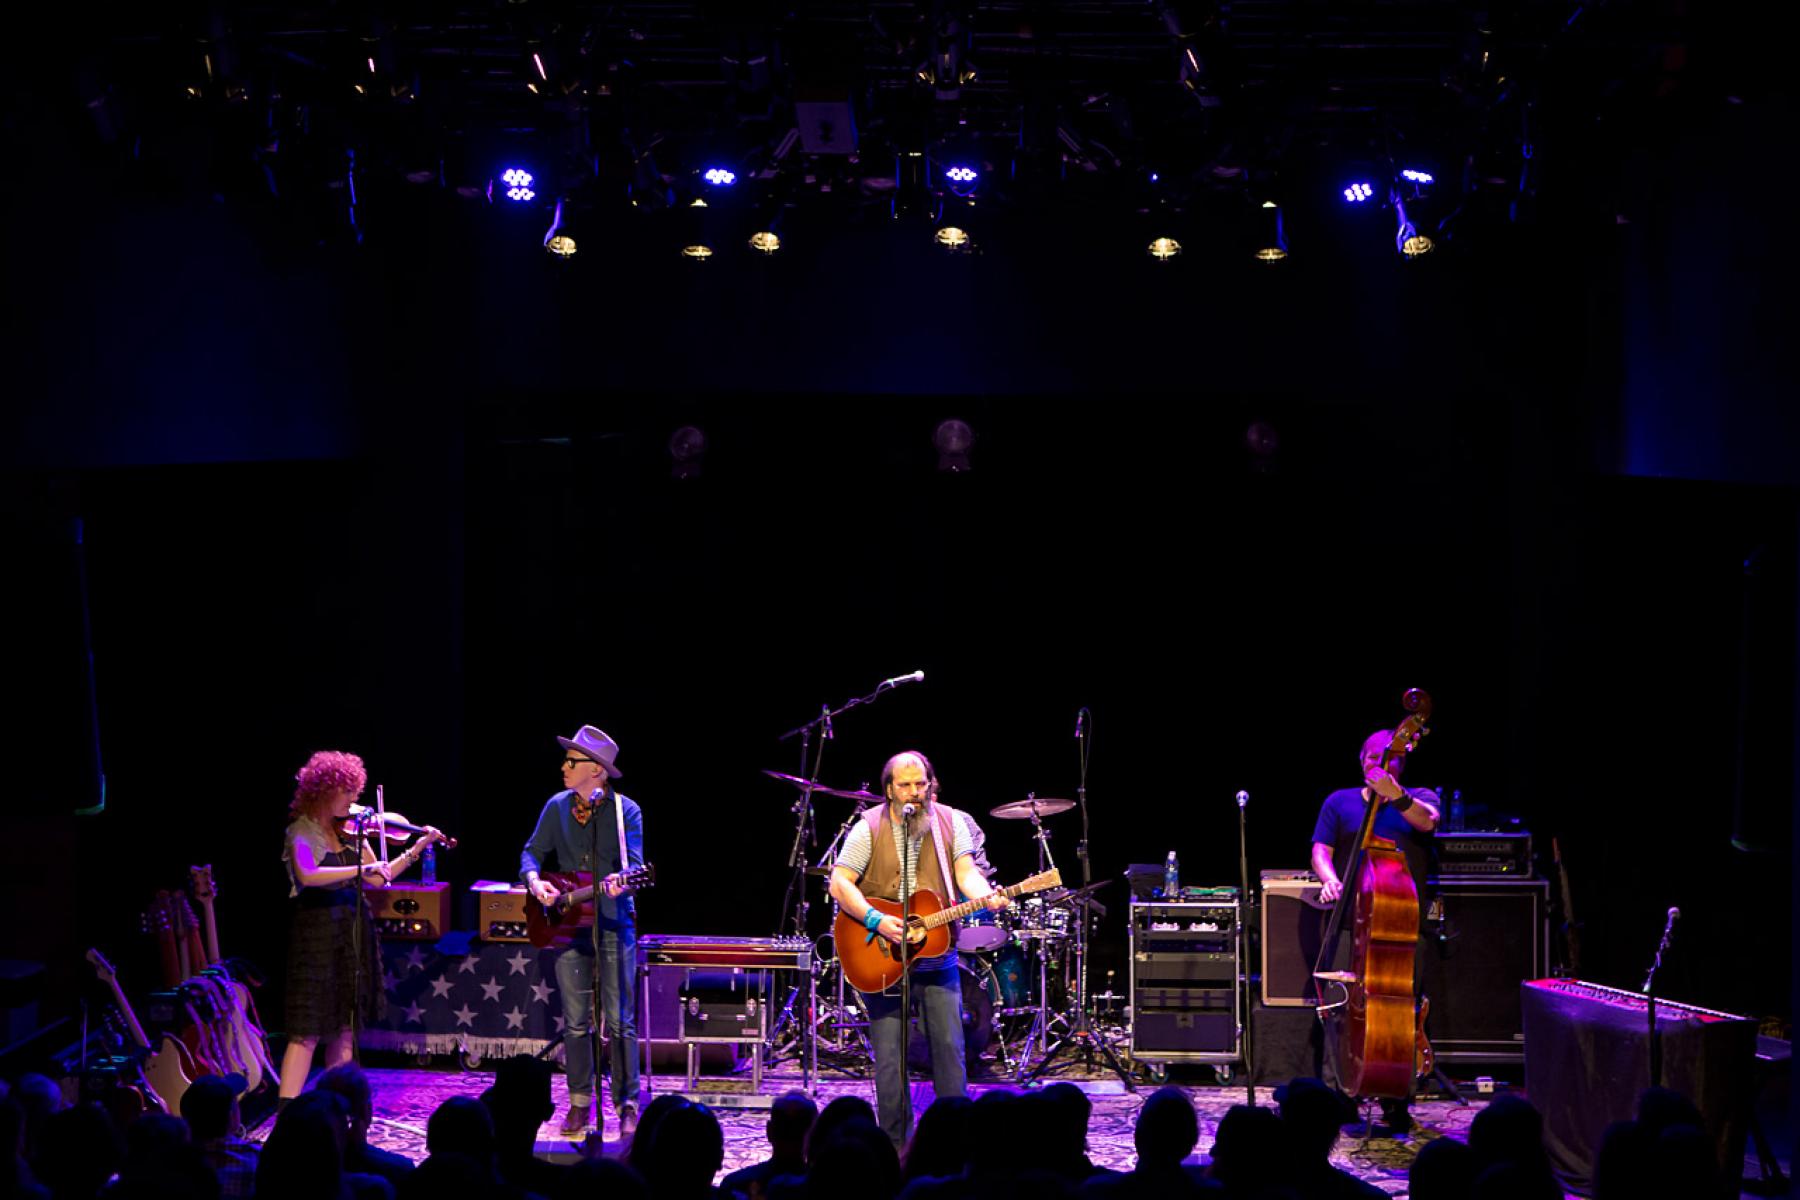 Steve Earle and The Dukes, June 14, 2015. Photo by Lesley Brown.